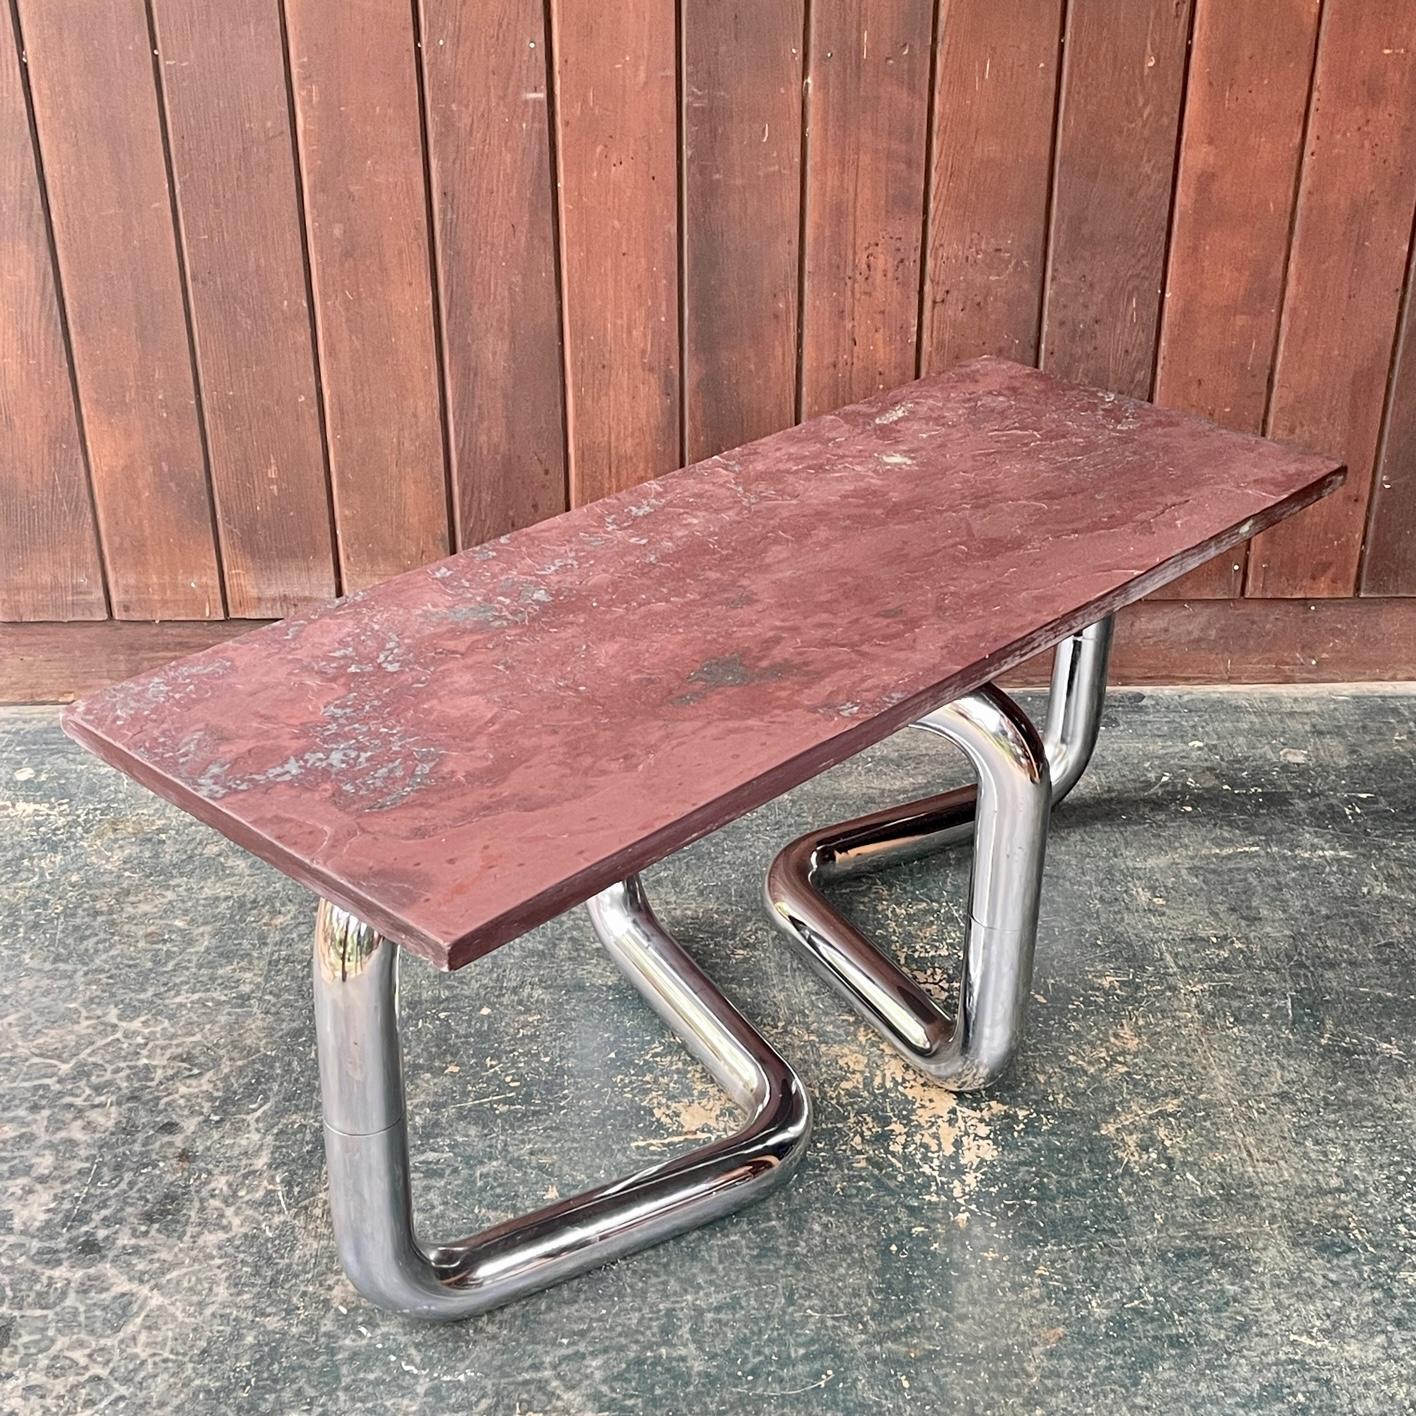 Modern50 Assemblage Coffee Table from Chromed Steel Pipe Table Base with Cast Slate Top. All parts were created in the 1960s-1970s.

The top could be switched out for glass, then we can ship the base to you via FEDEX, then you would order your